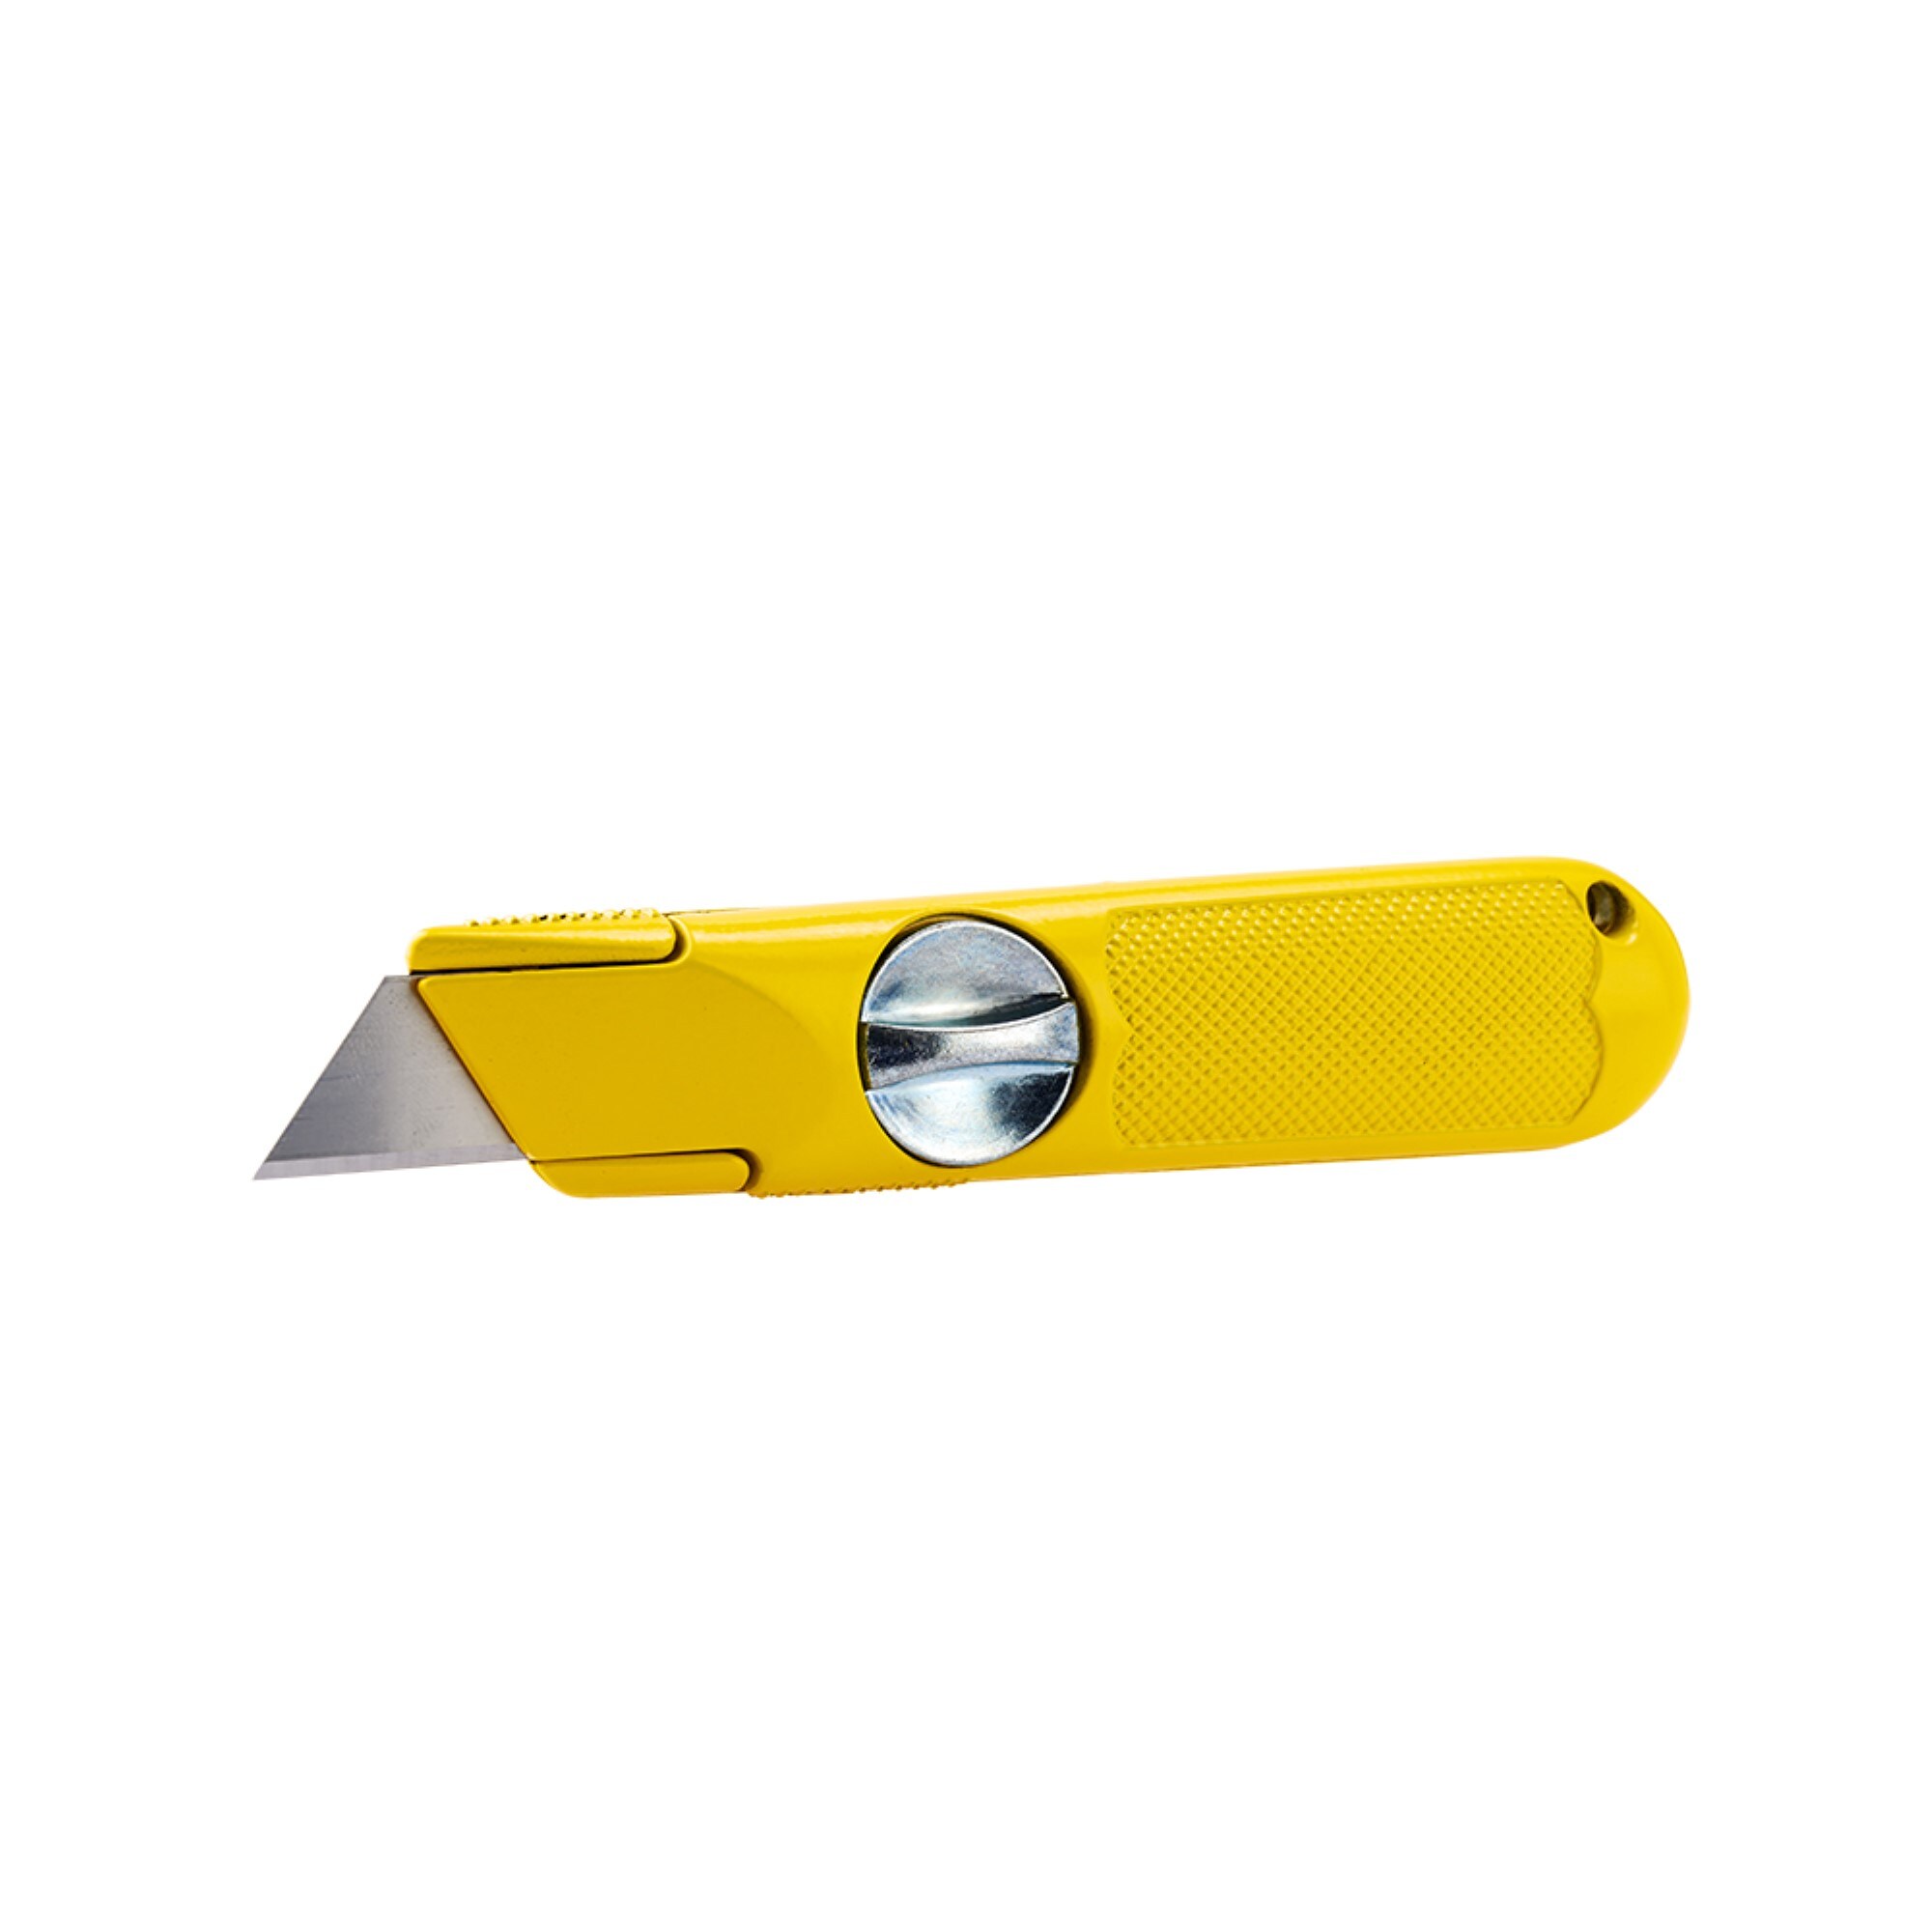 Compact Safety Ceramic Blade Box Cutter, Retractable Blade, 0.5